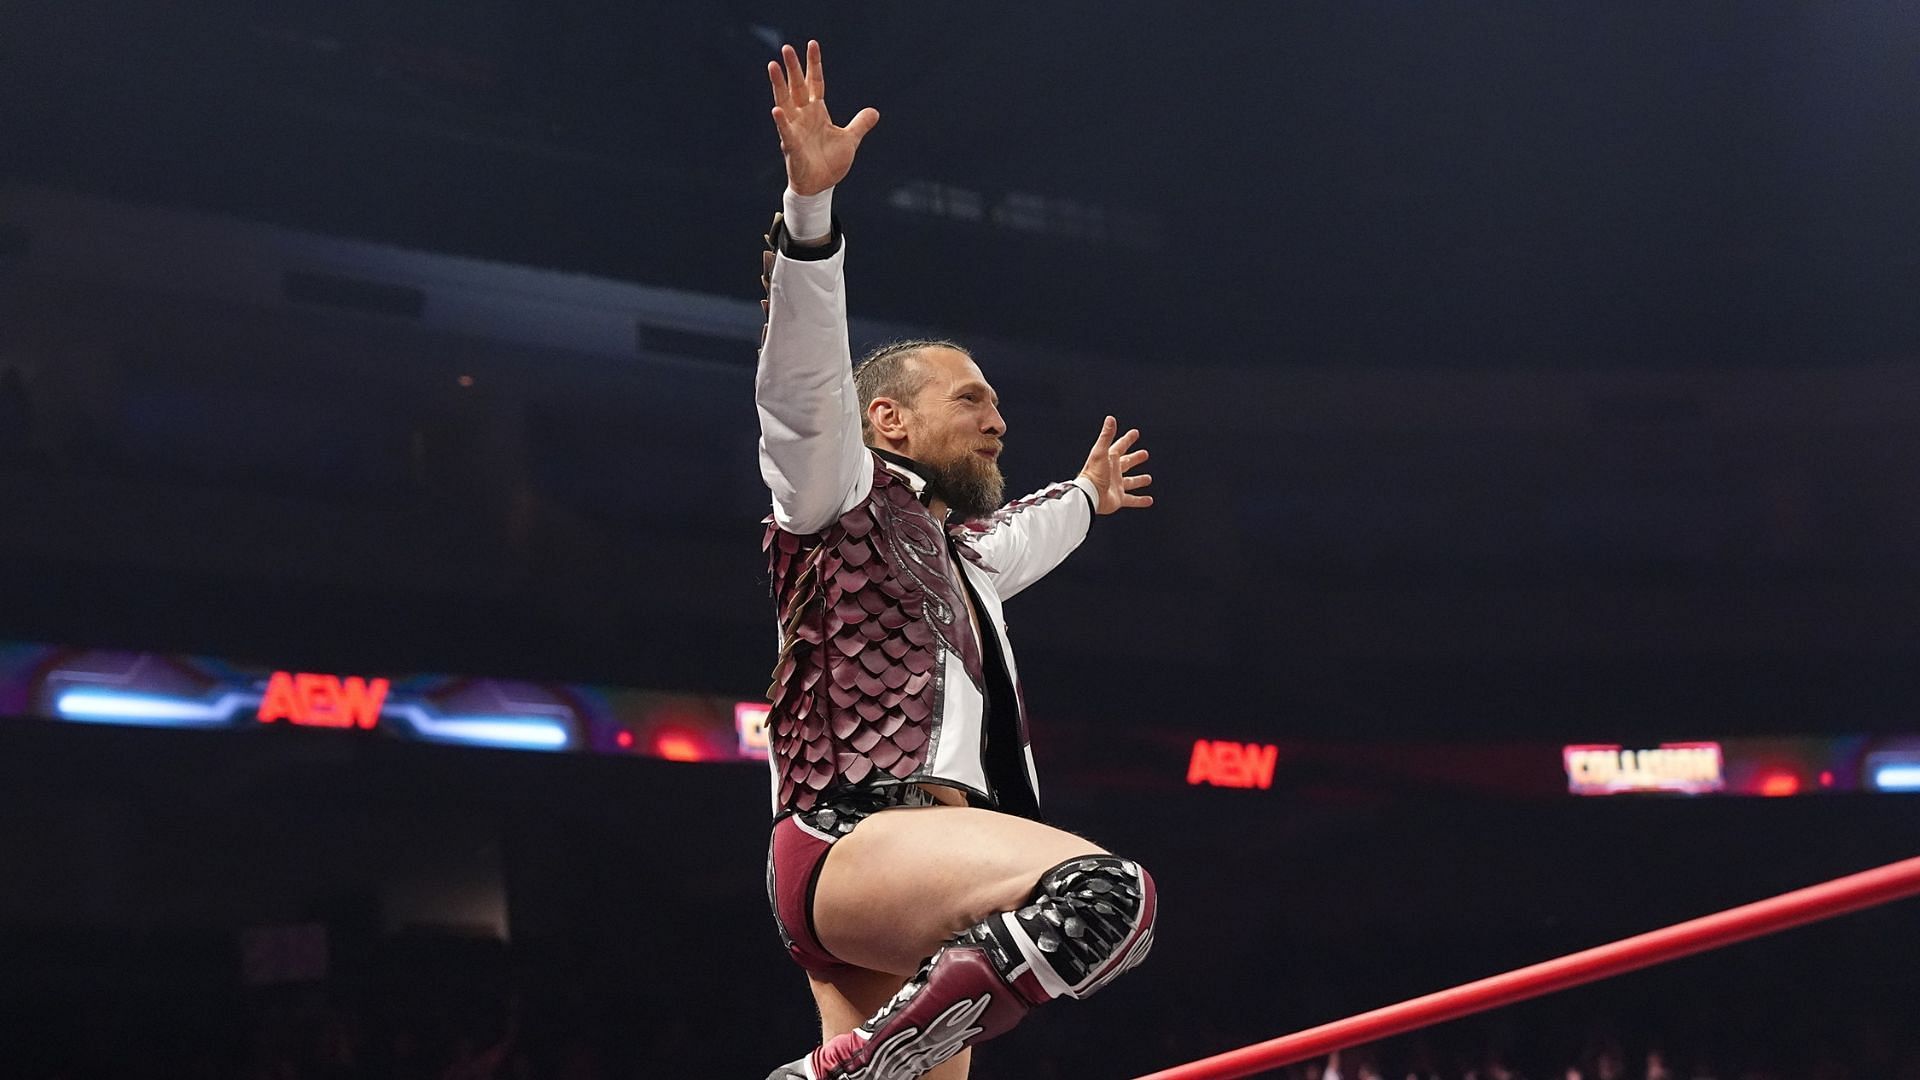 Bryan Danielson is a WWE Grand Slam Champion who is now with AEW [Photo courtesy of AEW